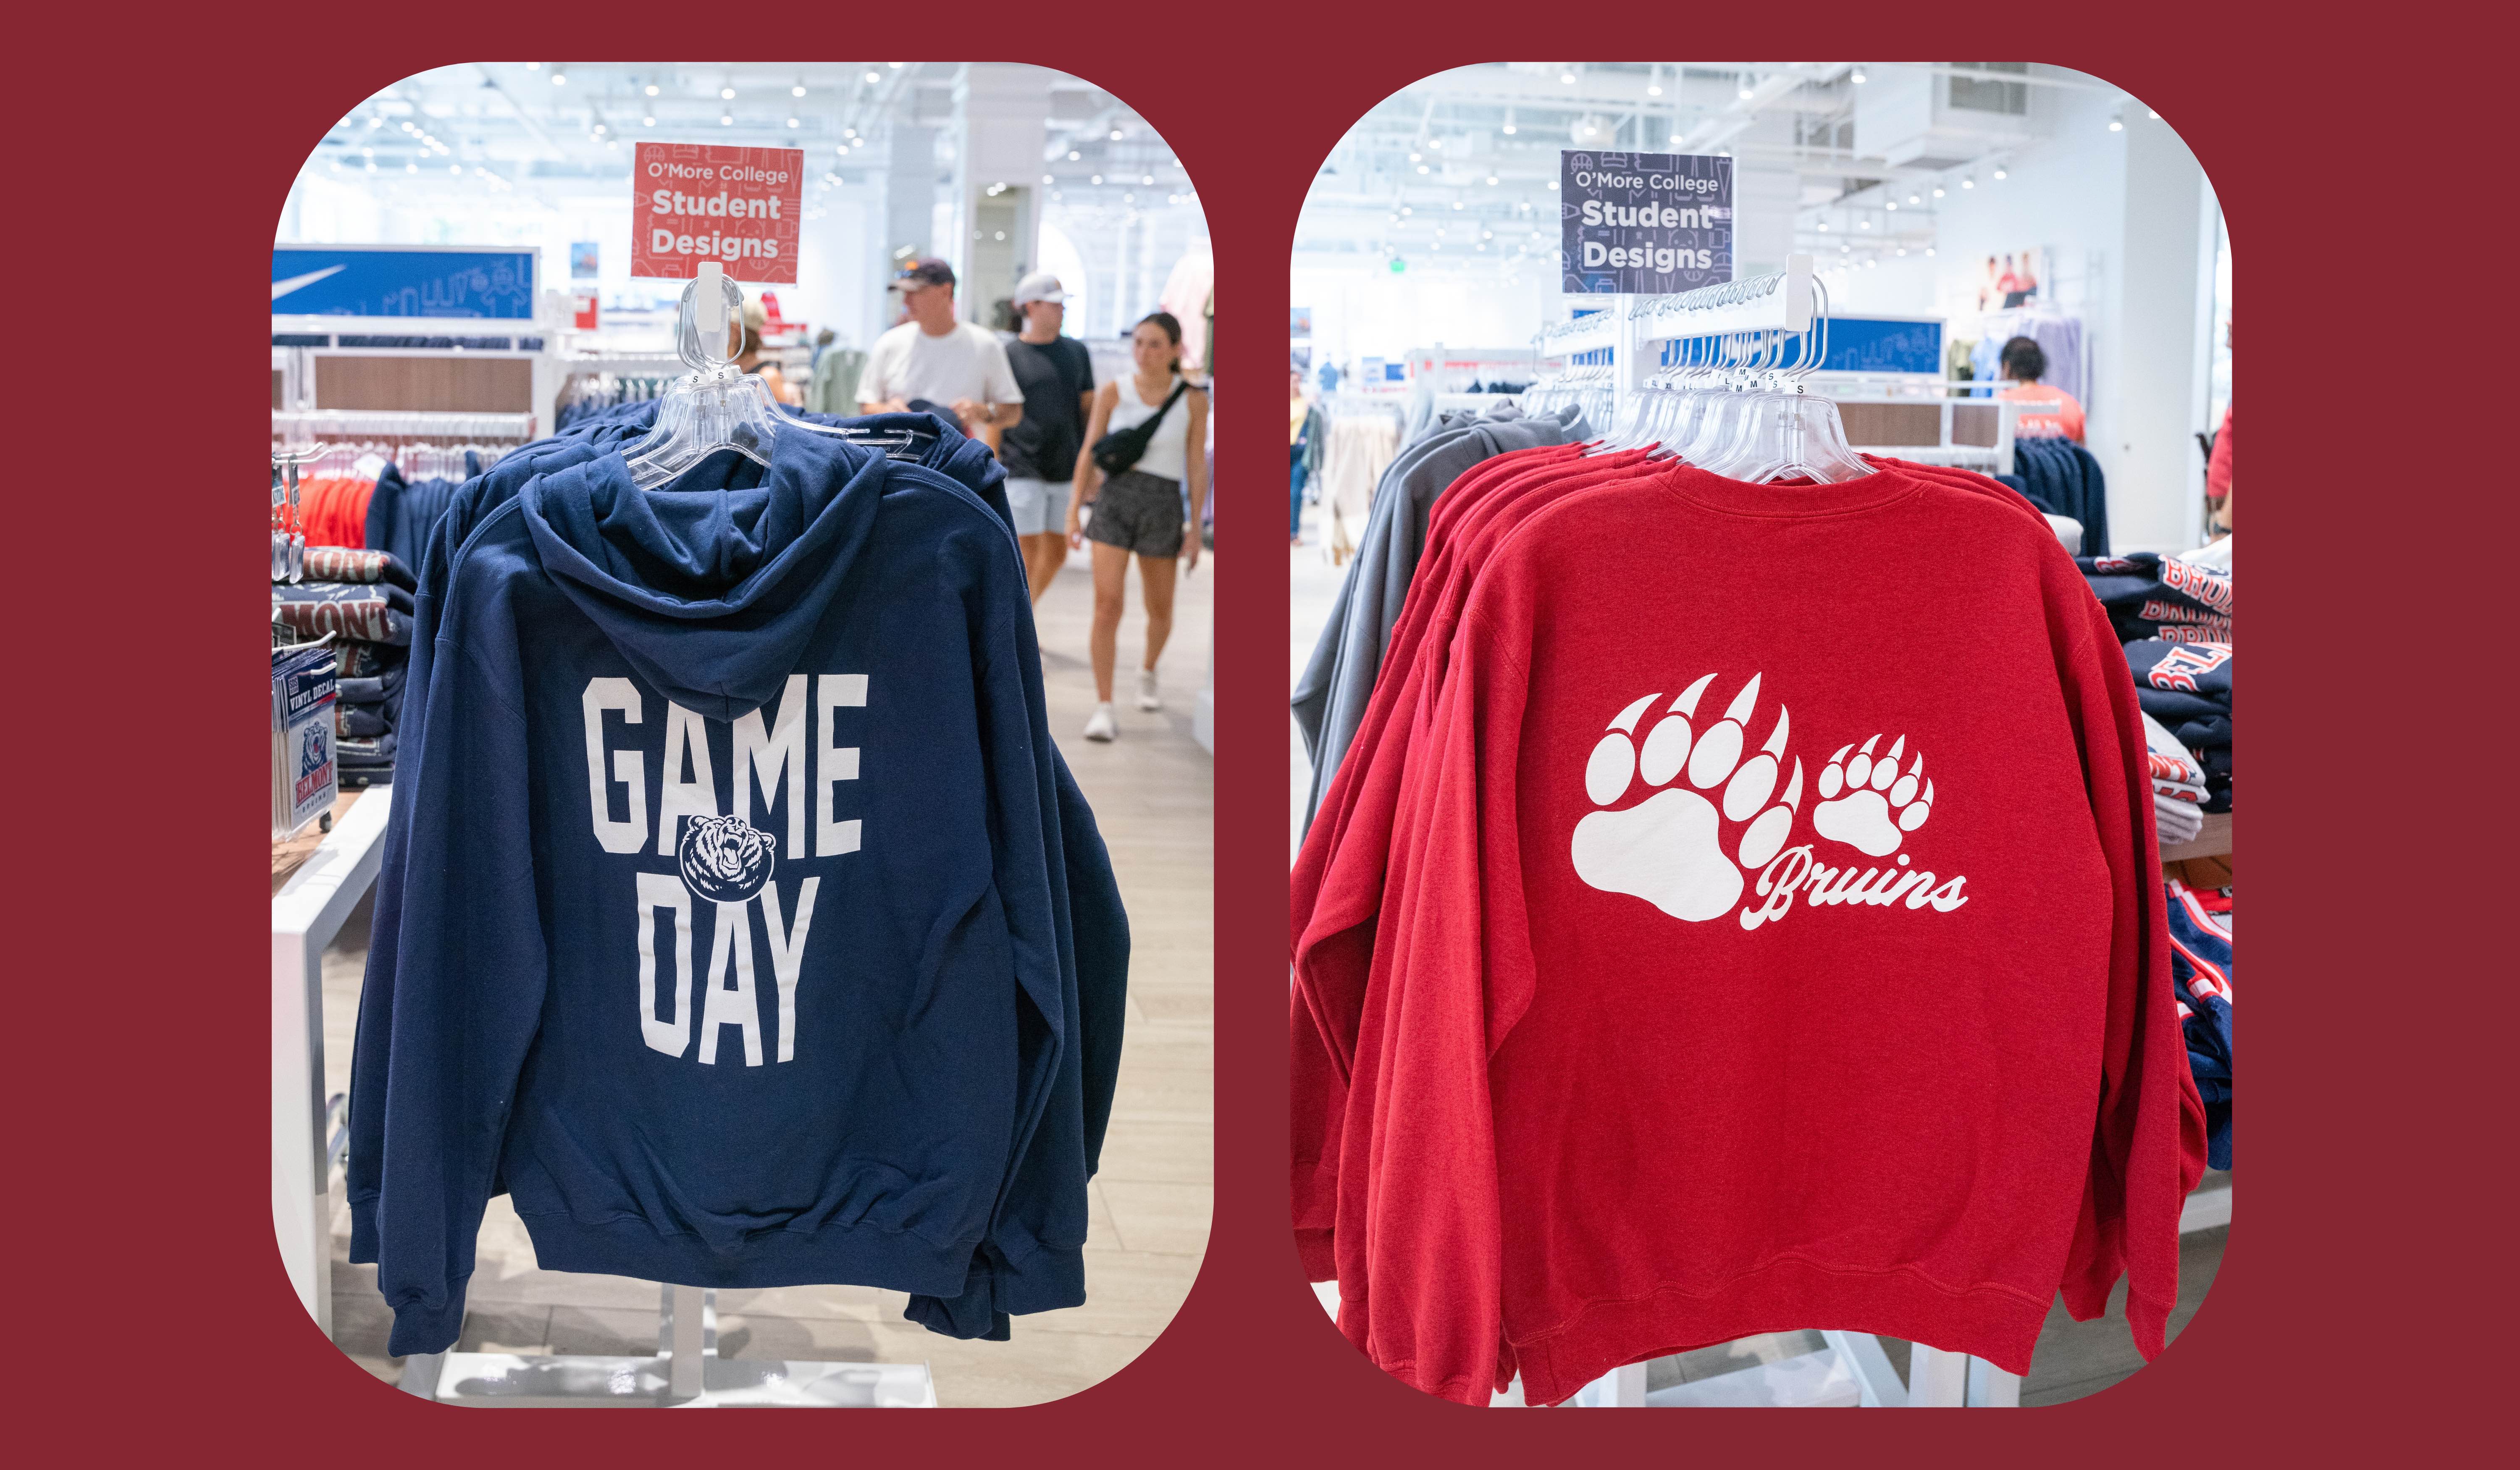 Two images of athletics designs created by O'More students: a navy sweatshirt that says "Game Day" and a grey sweatshirt with graphics on it